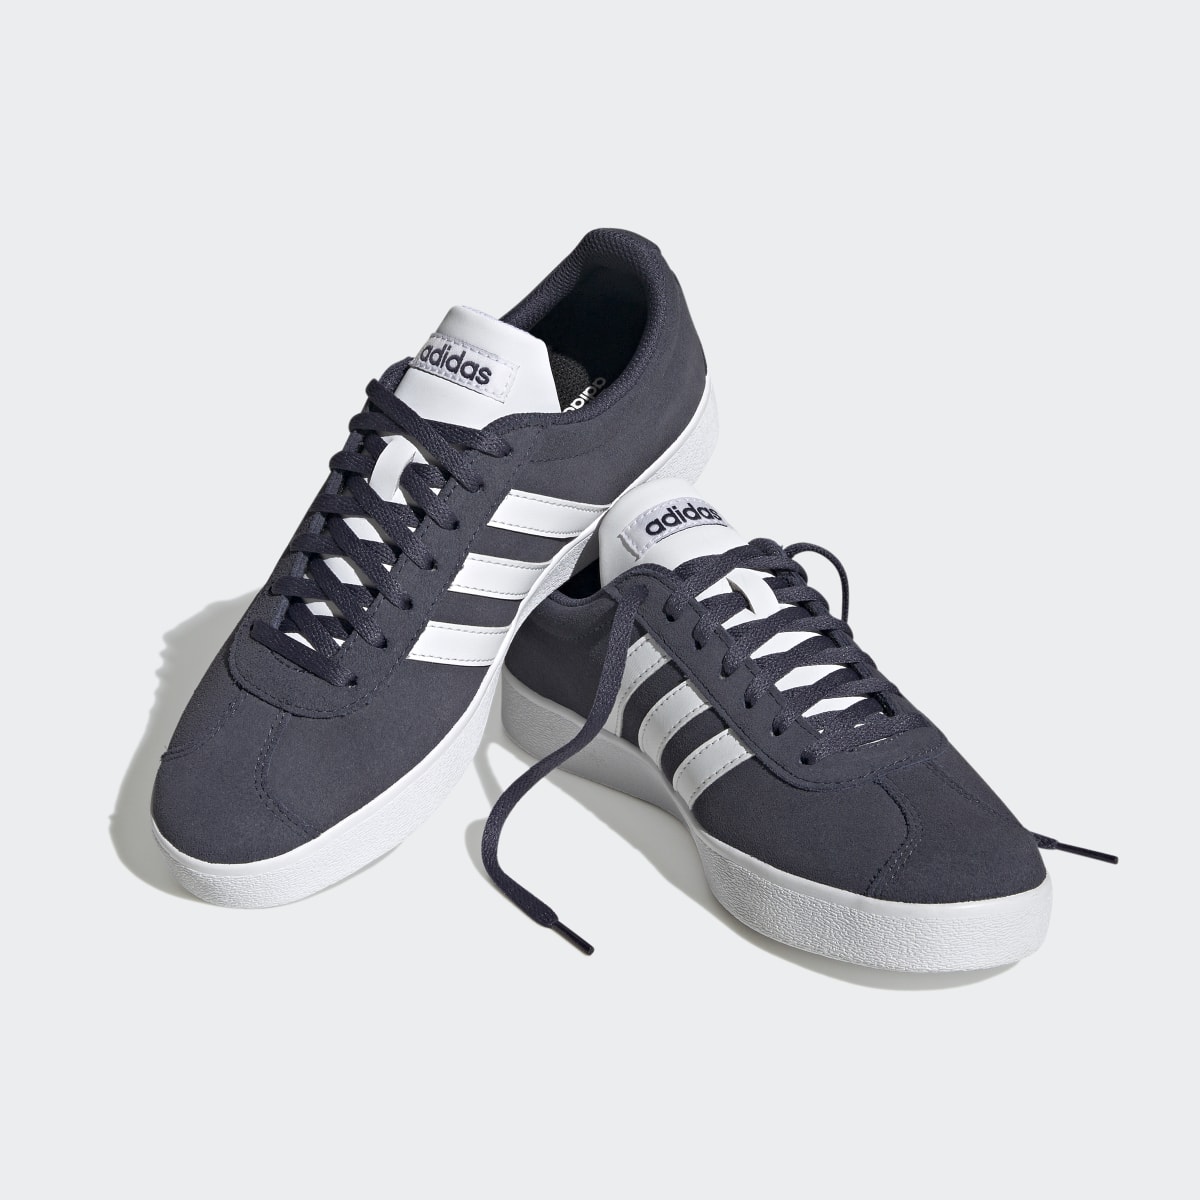 Adidas VL Court 2.0 Suede Shoes. 5